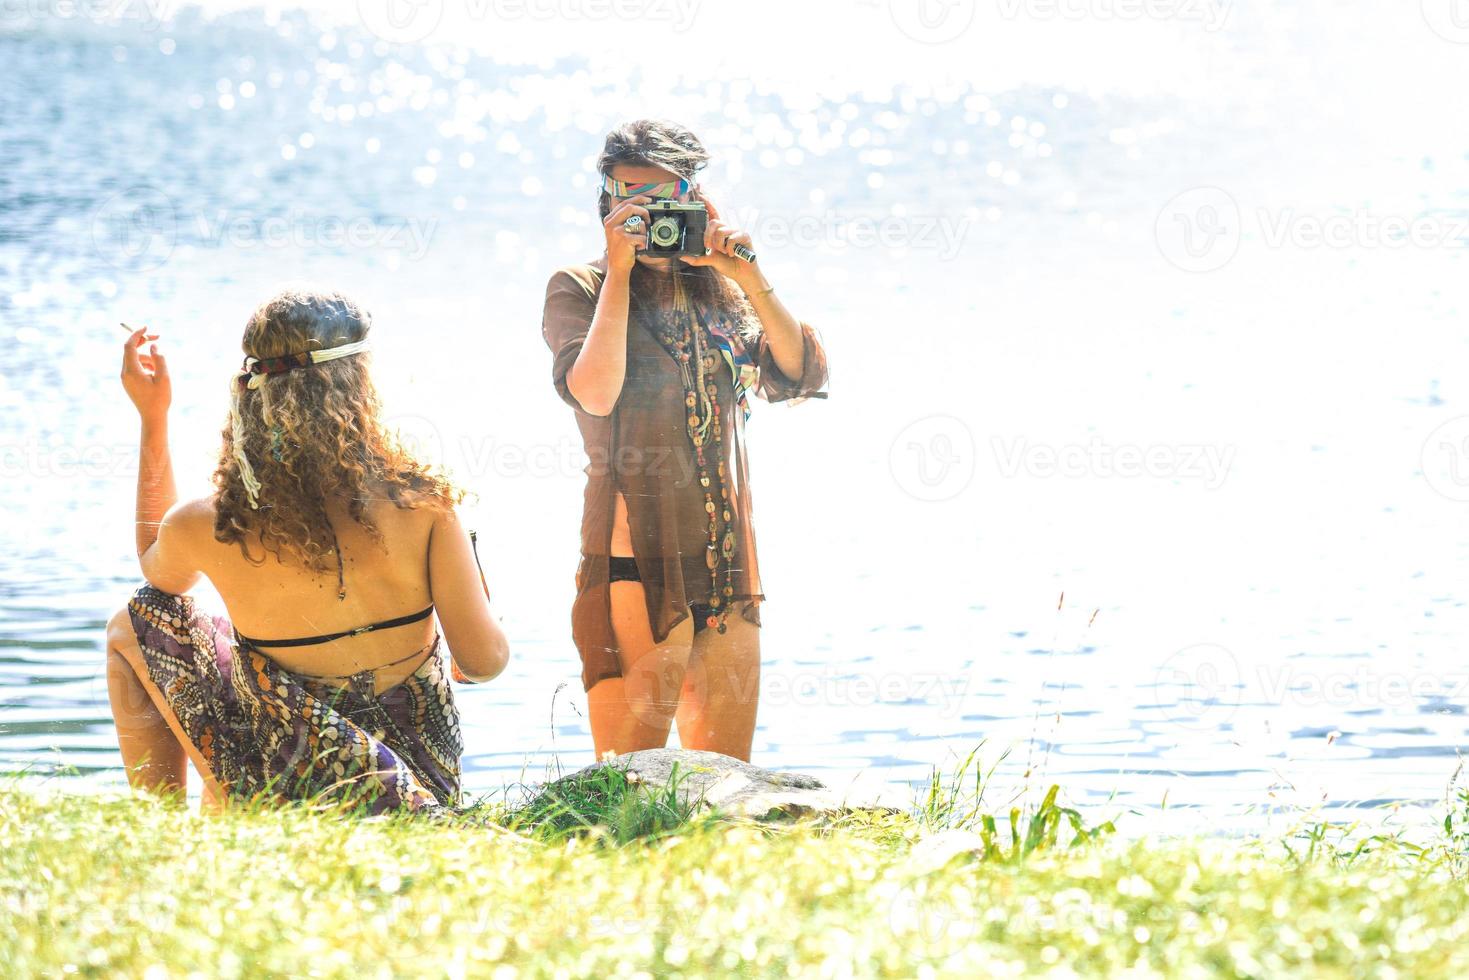 Hippie girls taking photos with an old camera and smoking - Vintage effect photo